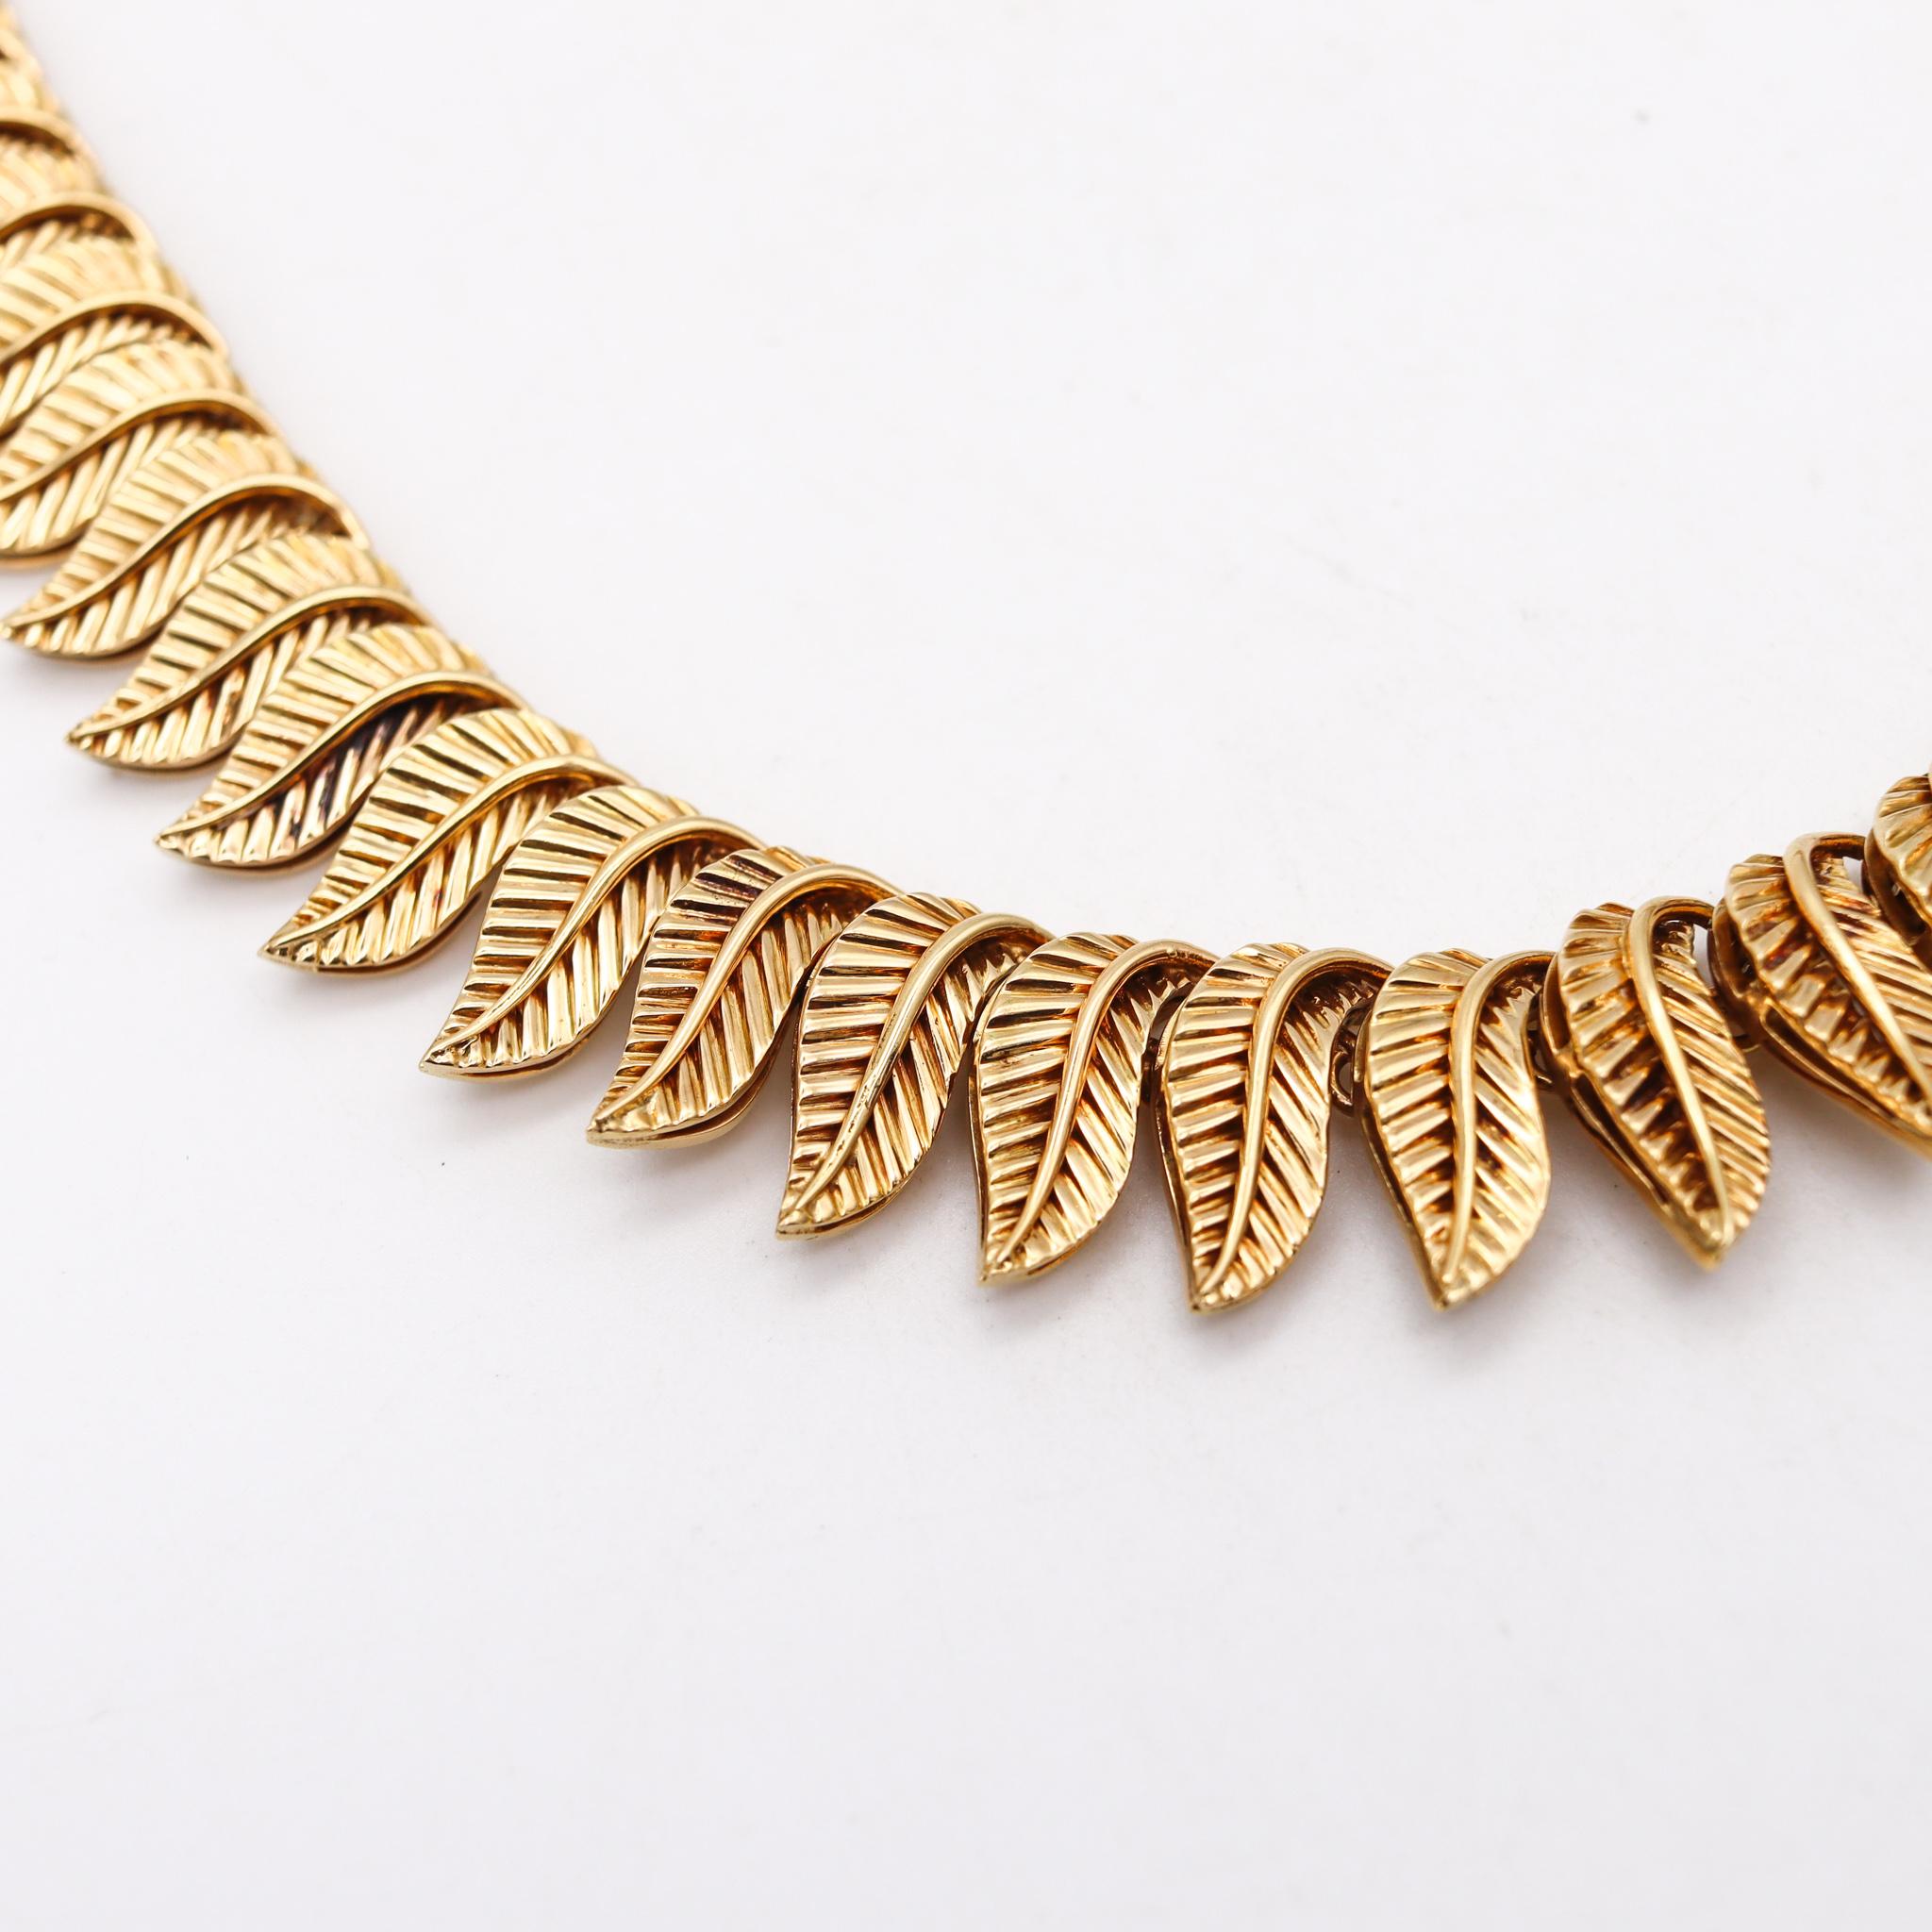 Choker necklace designed by Henri Poincot.

An estatement bold piece with a gorgeous look, created during the post war and the mid century periods, back in the late 1950's. This wonderful choker necklace has been crafted in solid yellow gold of 18